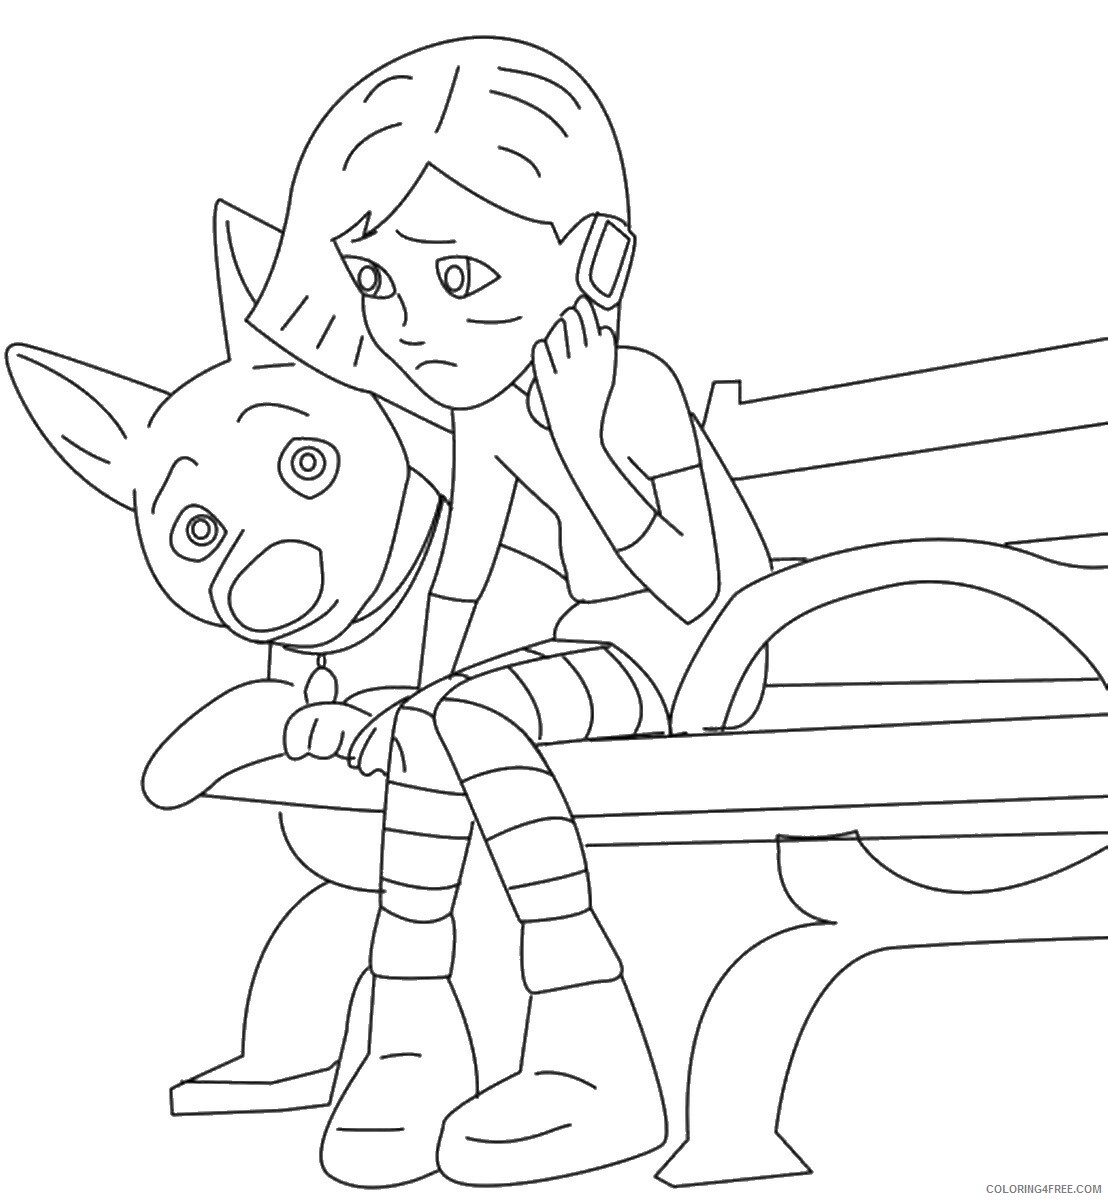 Bolt Coloring Pages TV Film bolt_cl_01 Printable 2020 01162 Coloring4free